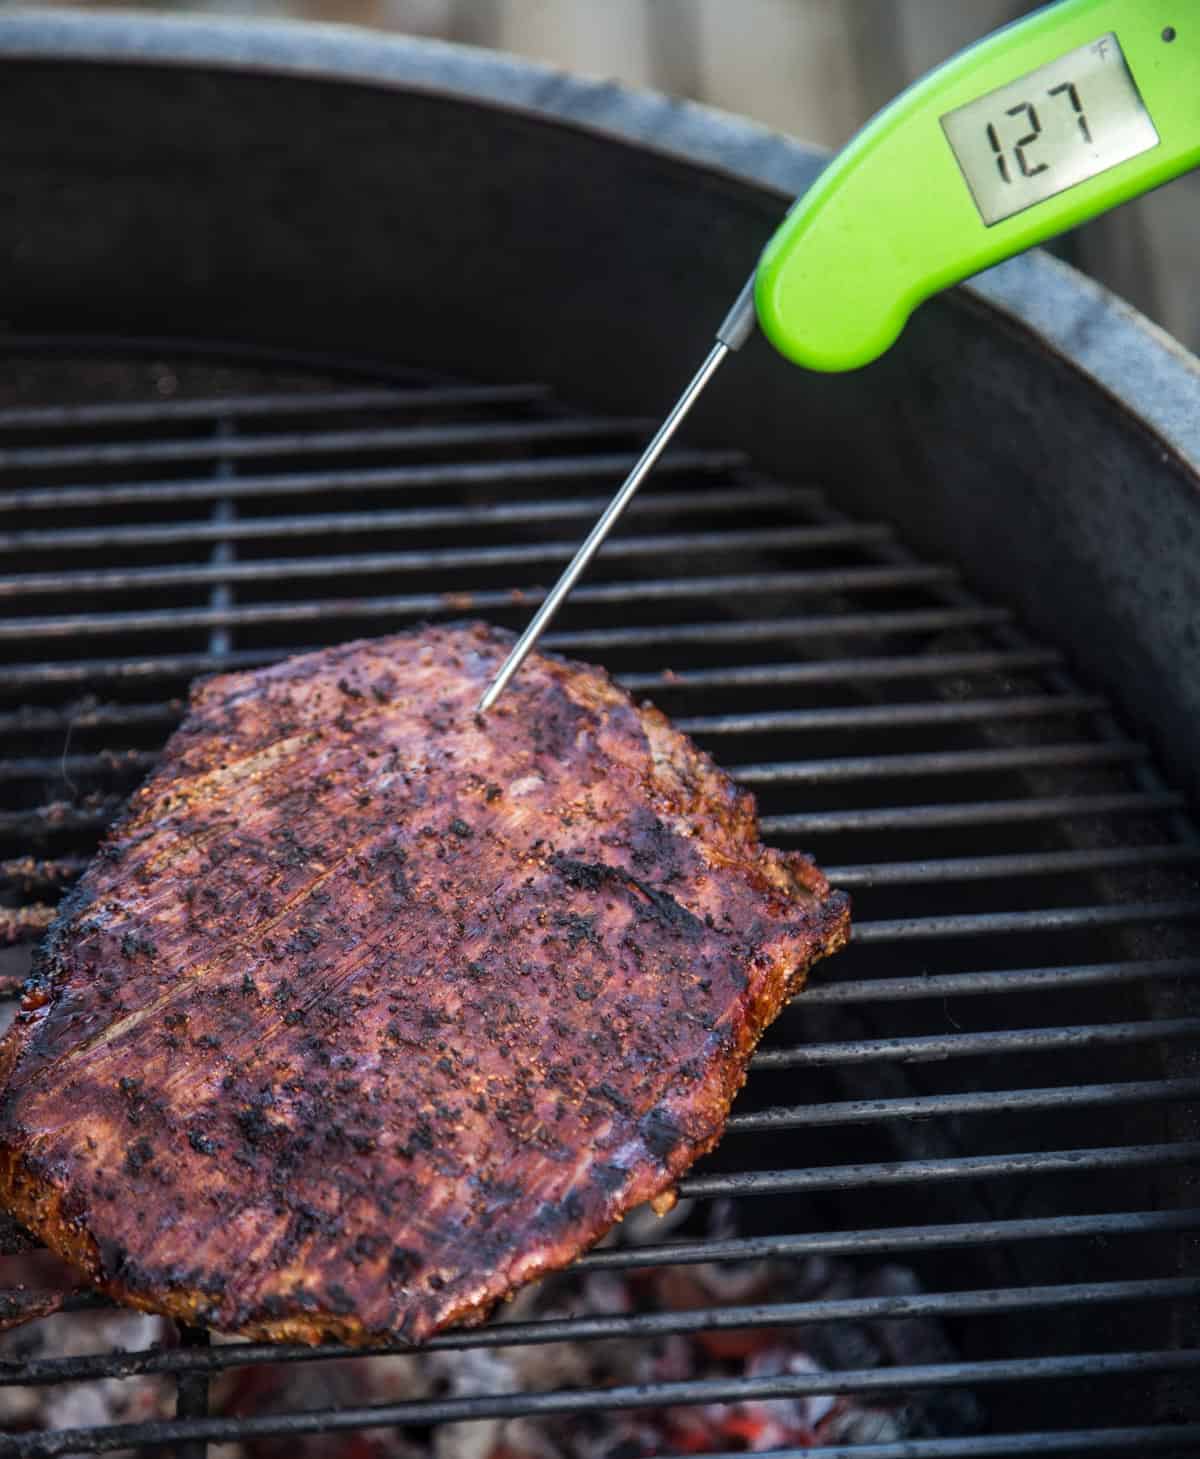 Taking the temperature of a grilled flank steak with a Thermoworks MK4 digital thermometer